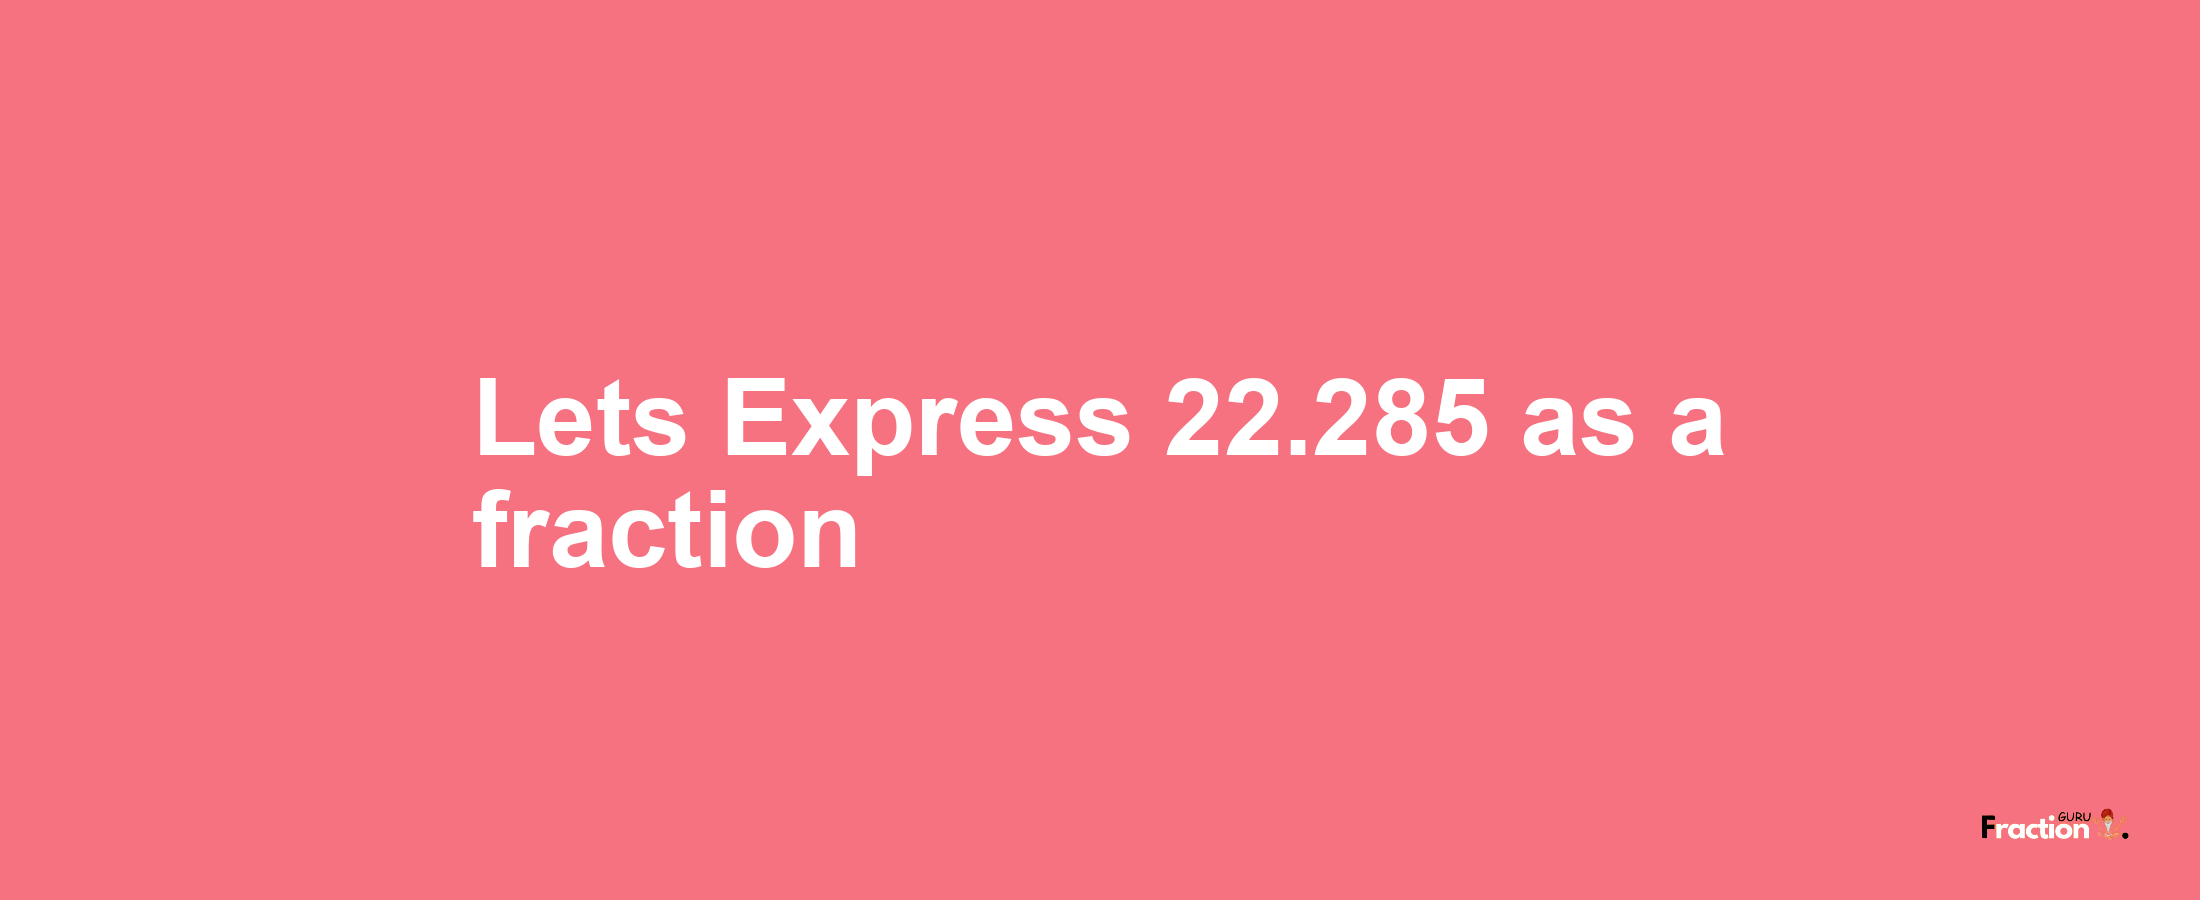 Lets Express 22.285 as afraction